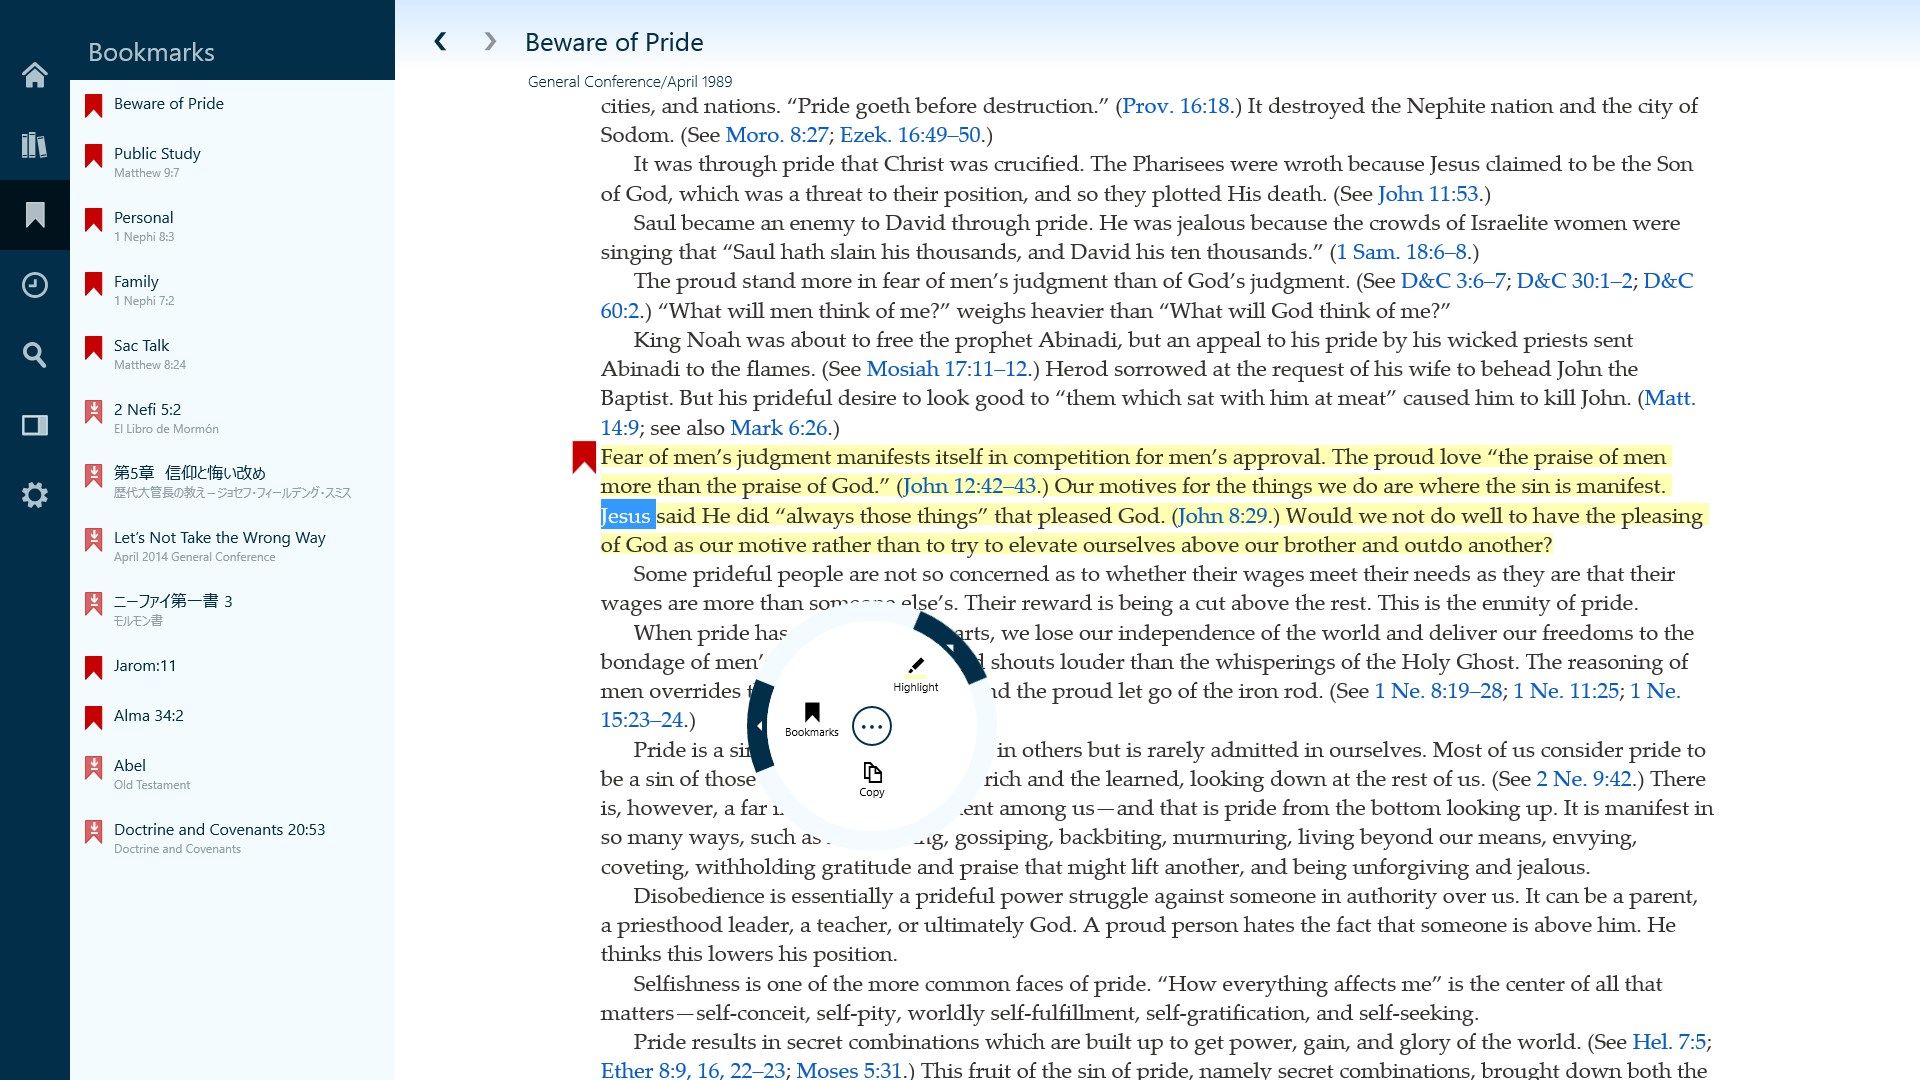 Bookmarks, highlighting, copying to clipboard at your fingertips.